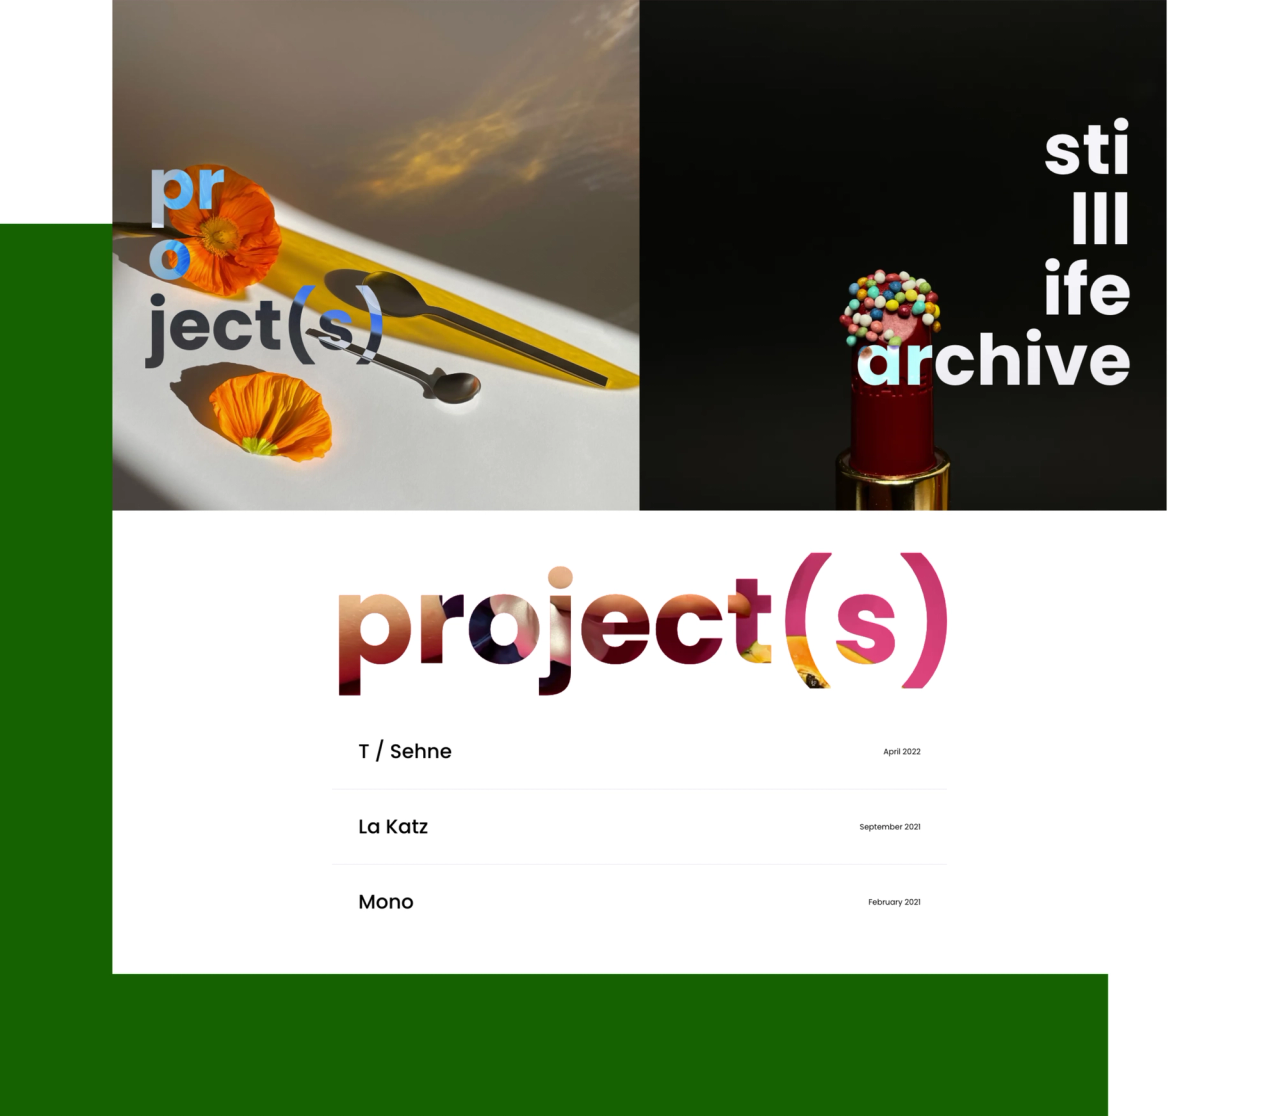 A preview of the hero and projects section of the website